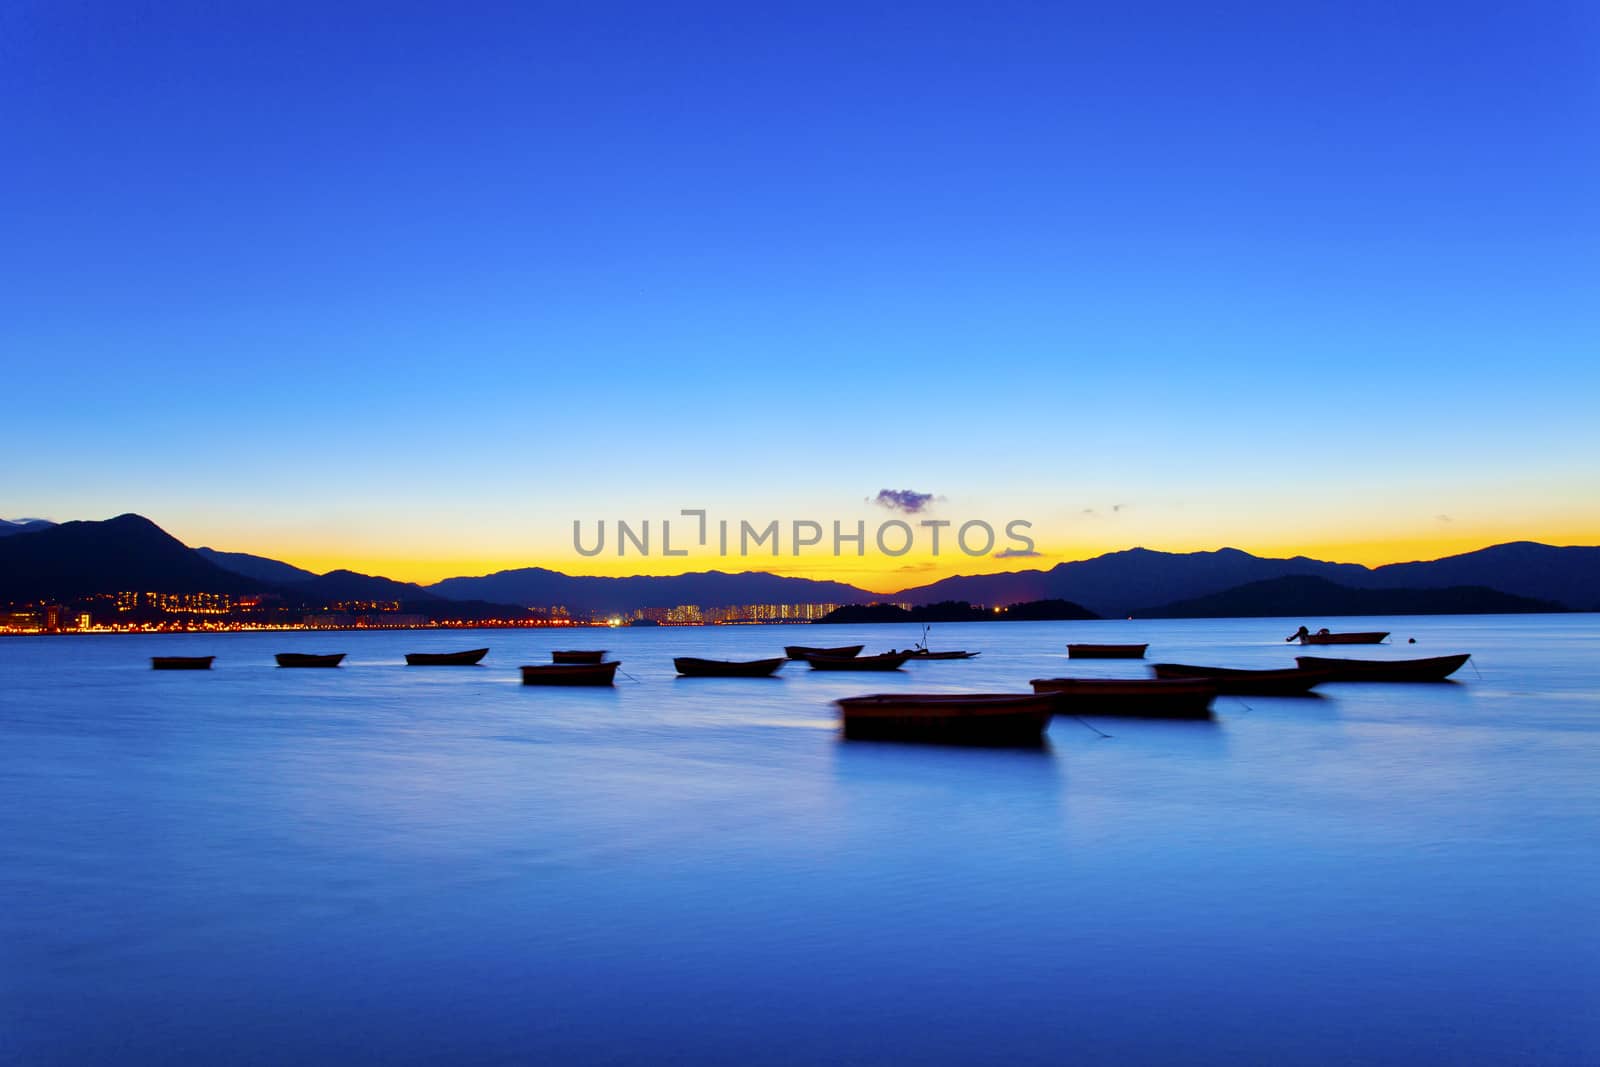 Sunset view by the coast with boats